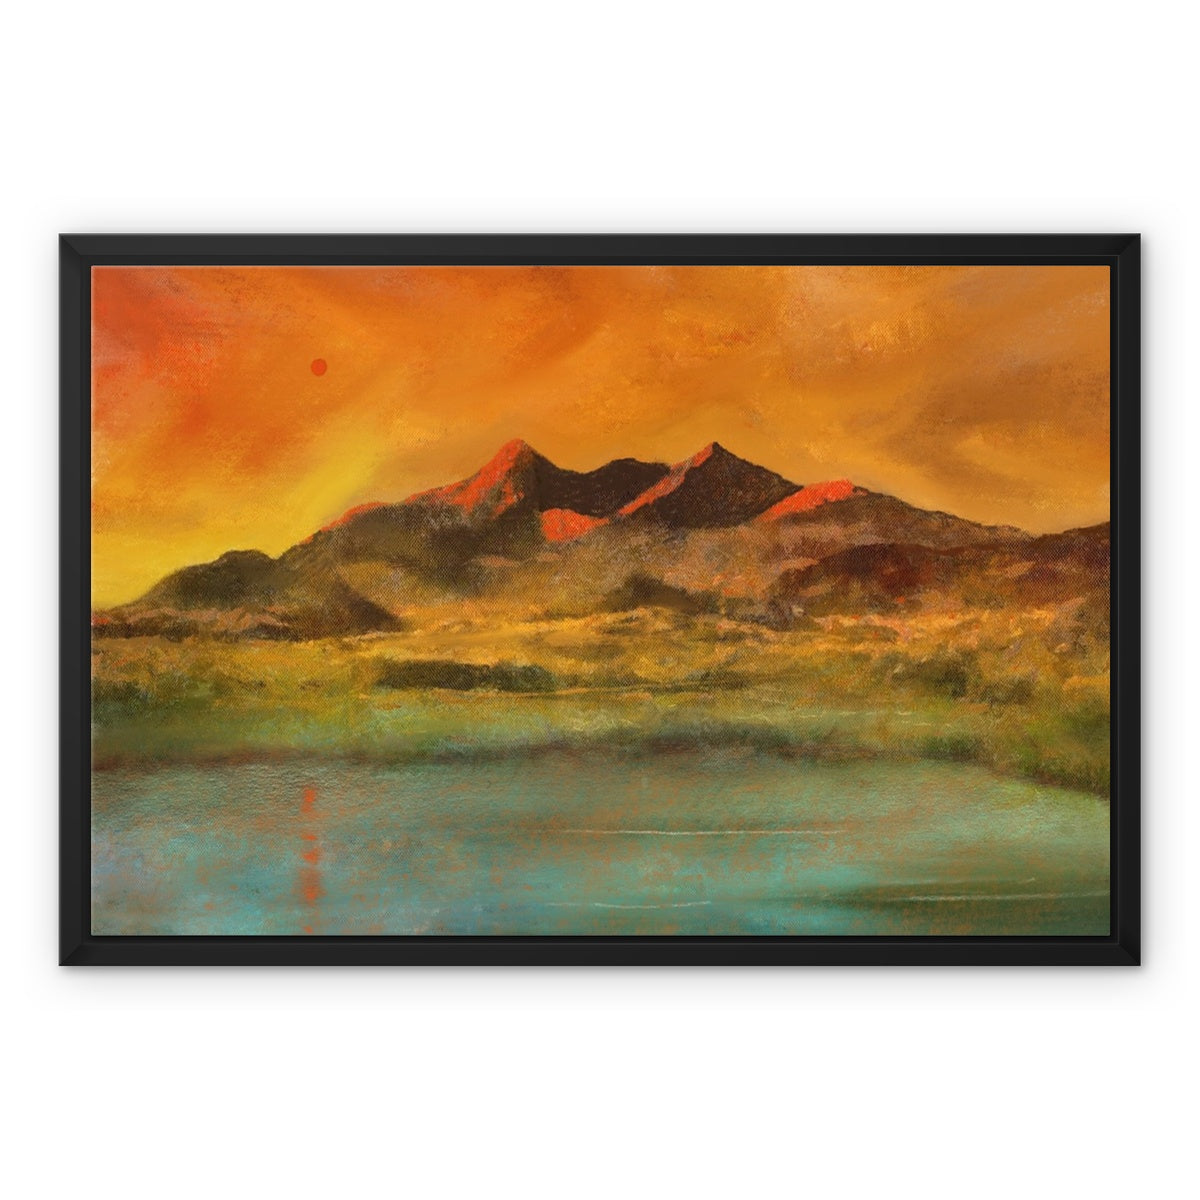 Skye Red Moon Cuillin Painting | Framed Canvas From Scotland-Floating Framed Canvas Prints-Skye Art Gallery-24"x18"-Black Frame-Paintings, Prints, Homeware, Art Gifts From Scotland By Scottish Artist Kevin Hunter